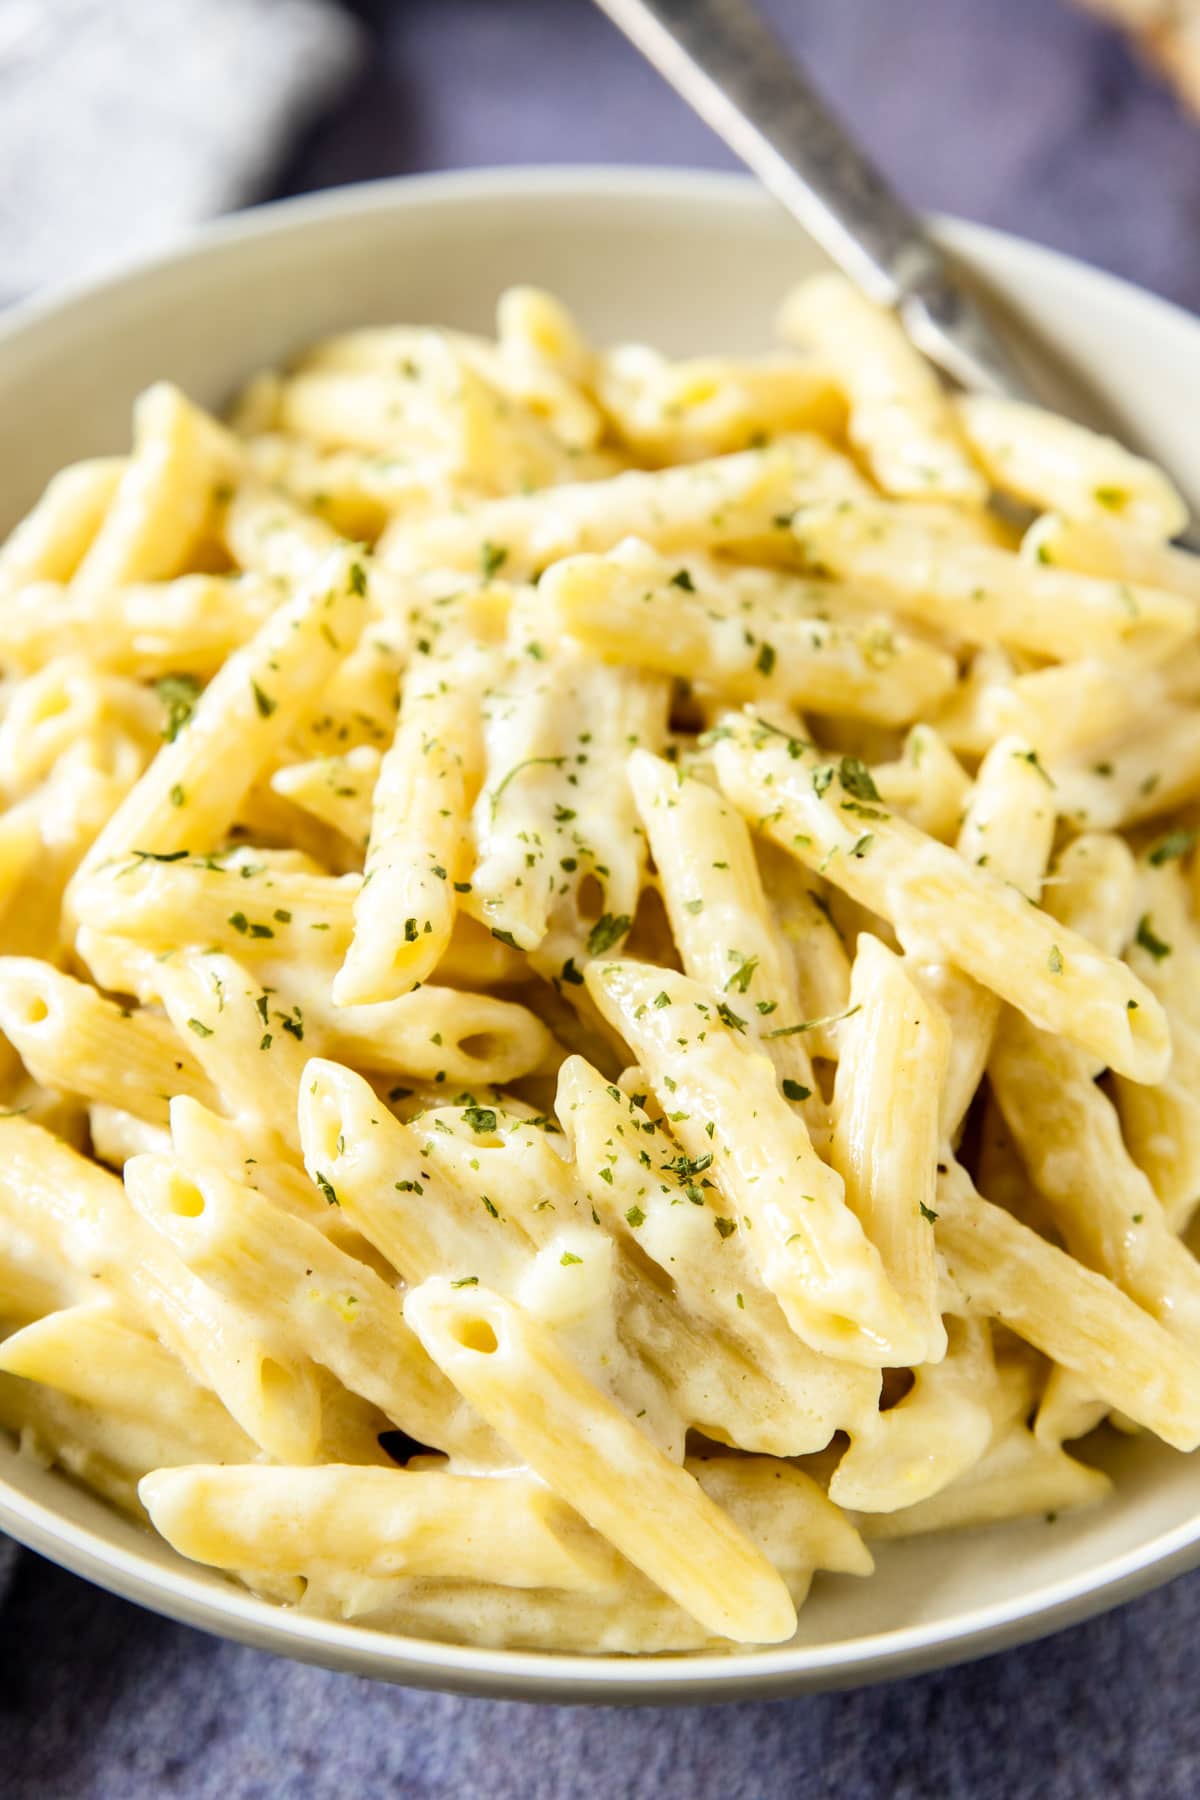 a bowl of penne pasta coated in a mascarpone cheese sauce